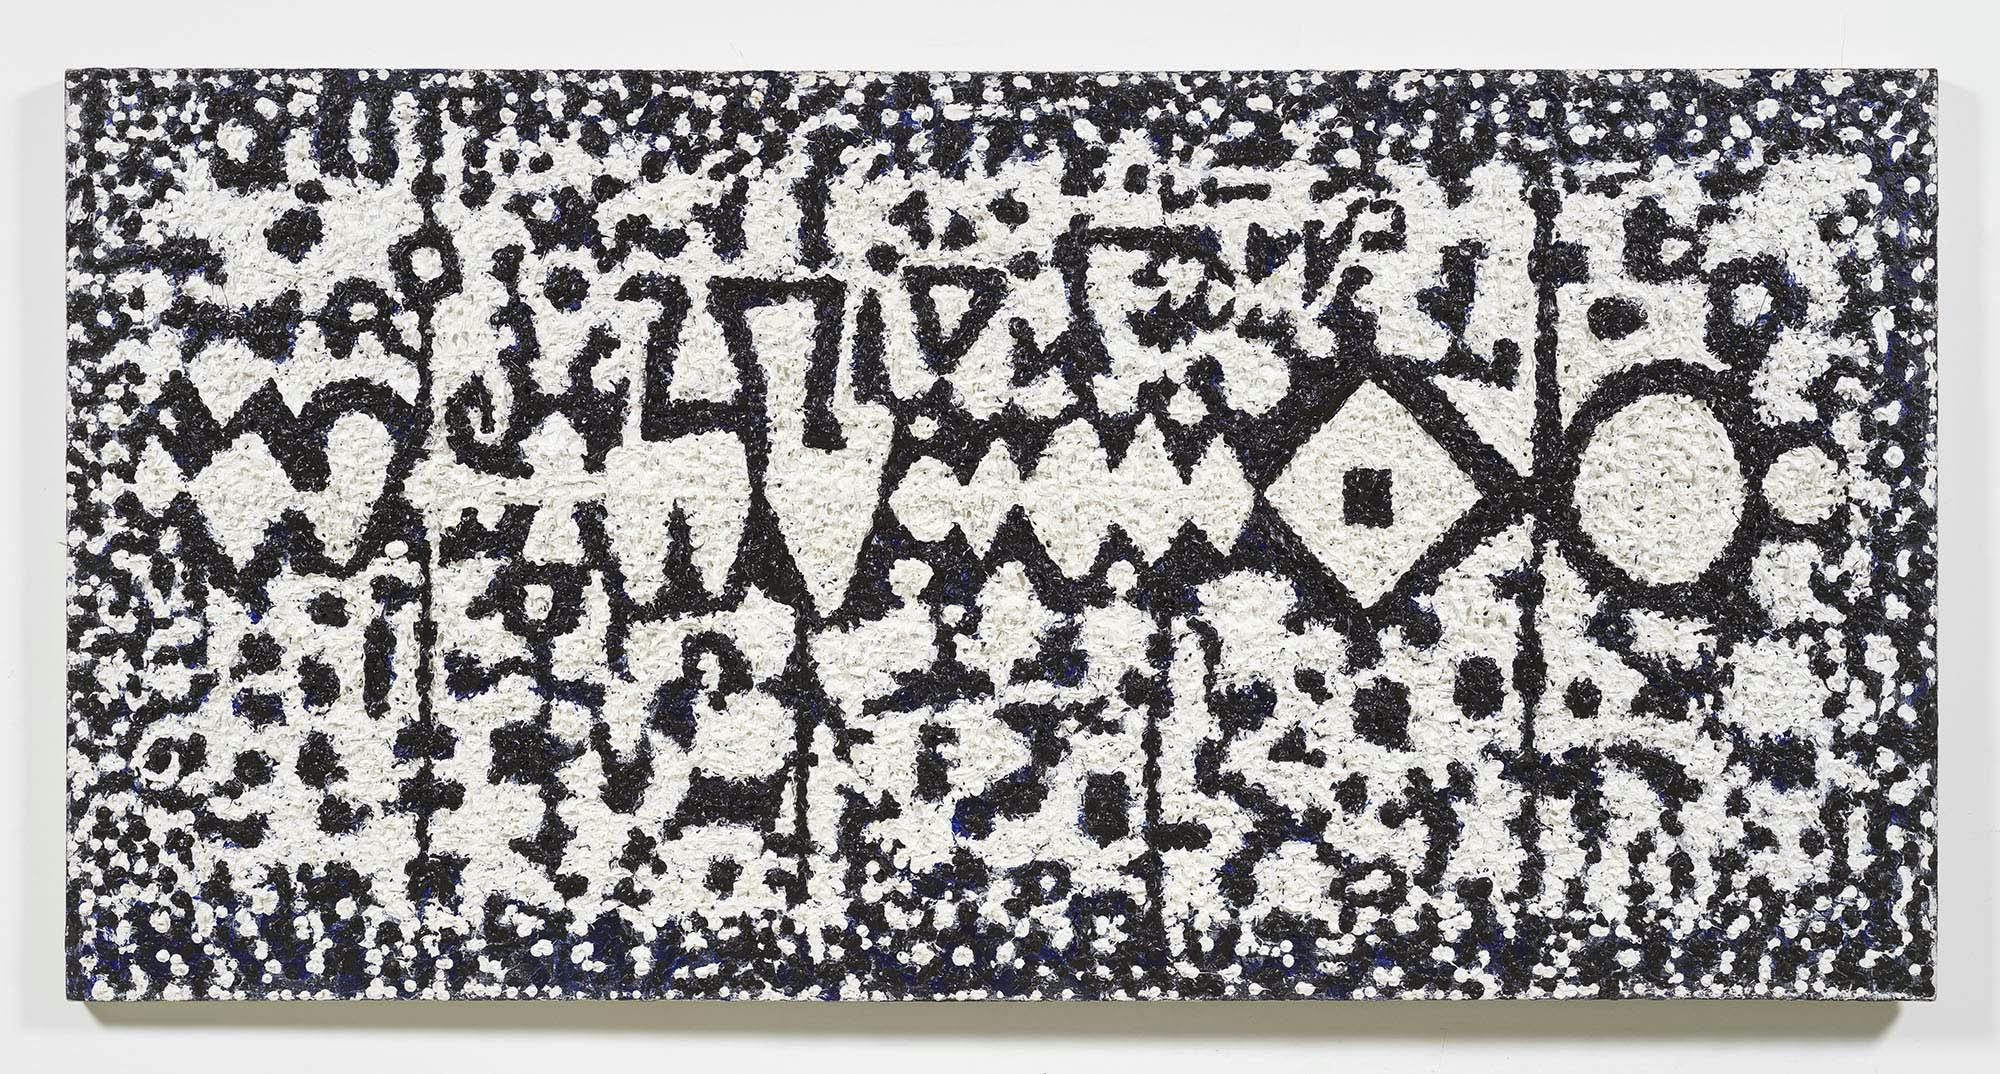 Black and White Fugue
1979–80
Acrylic on canvas
42 1/2 x 85 1/2 in. (108 x 217.2 cm)
 – The Richard Pousette-Dart Foundation